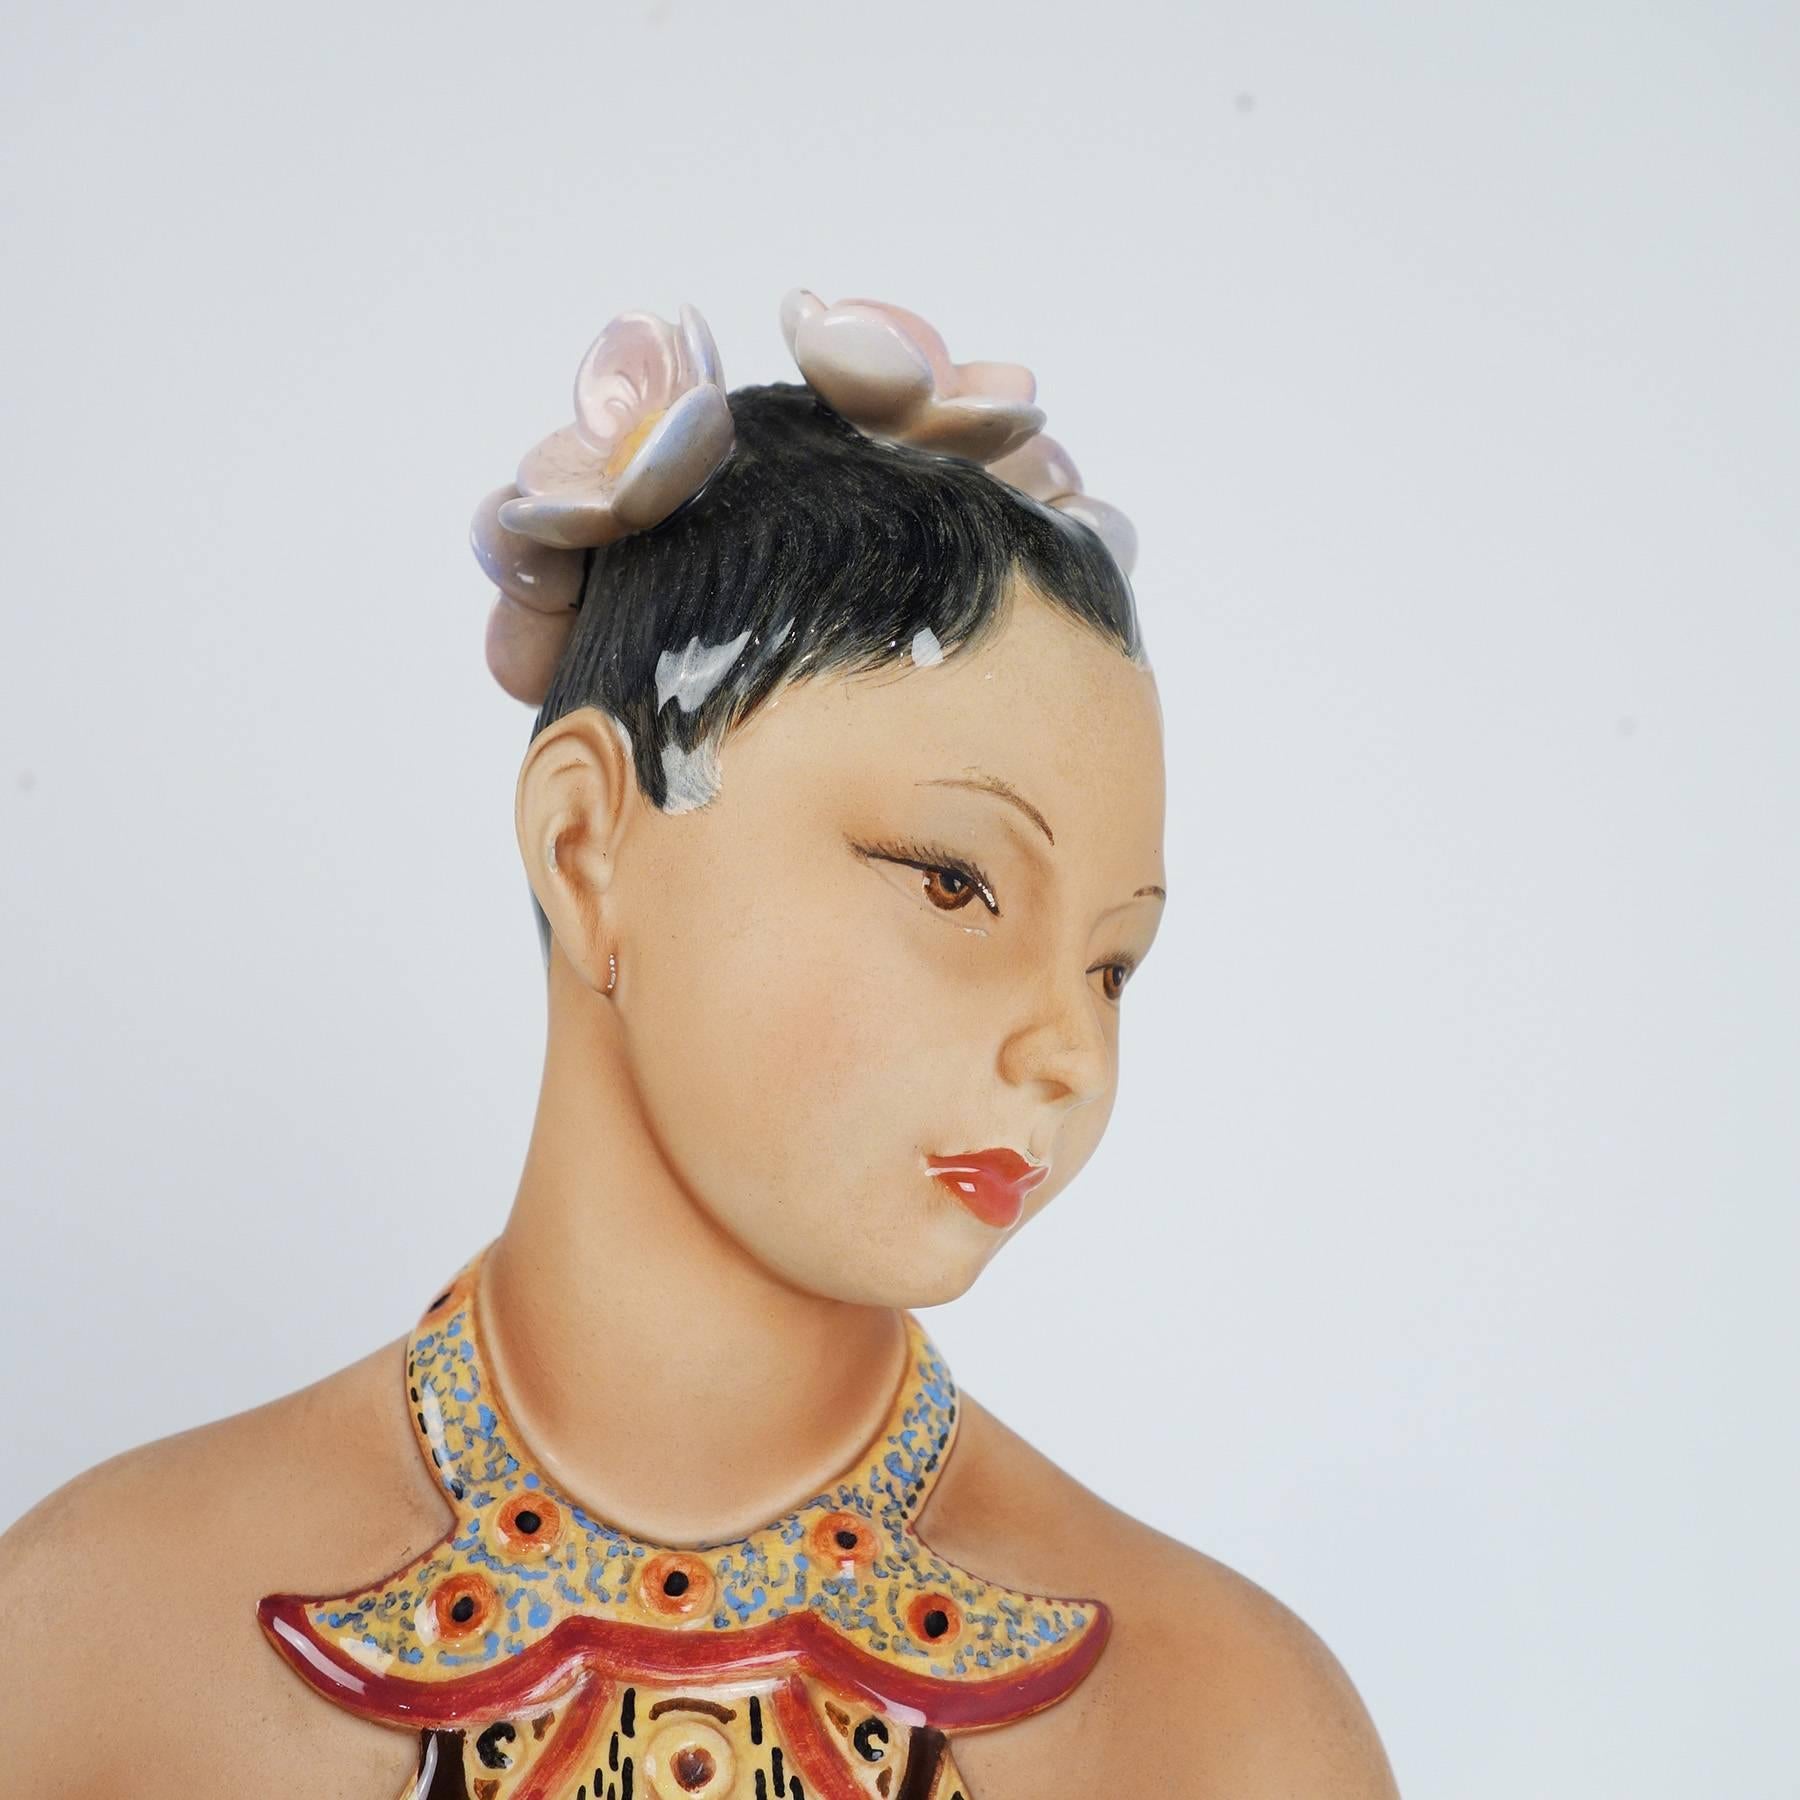 Hand-Painted 'Penida' Figurine from the 1940s by Le Bertetti For Sale